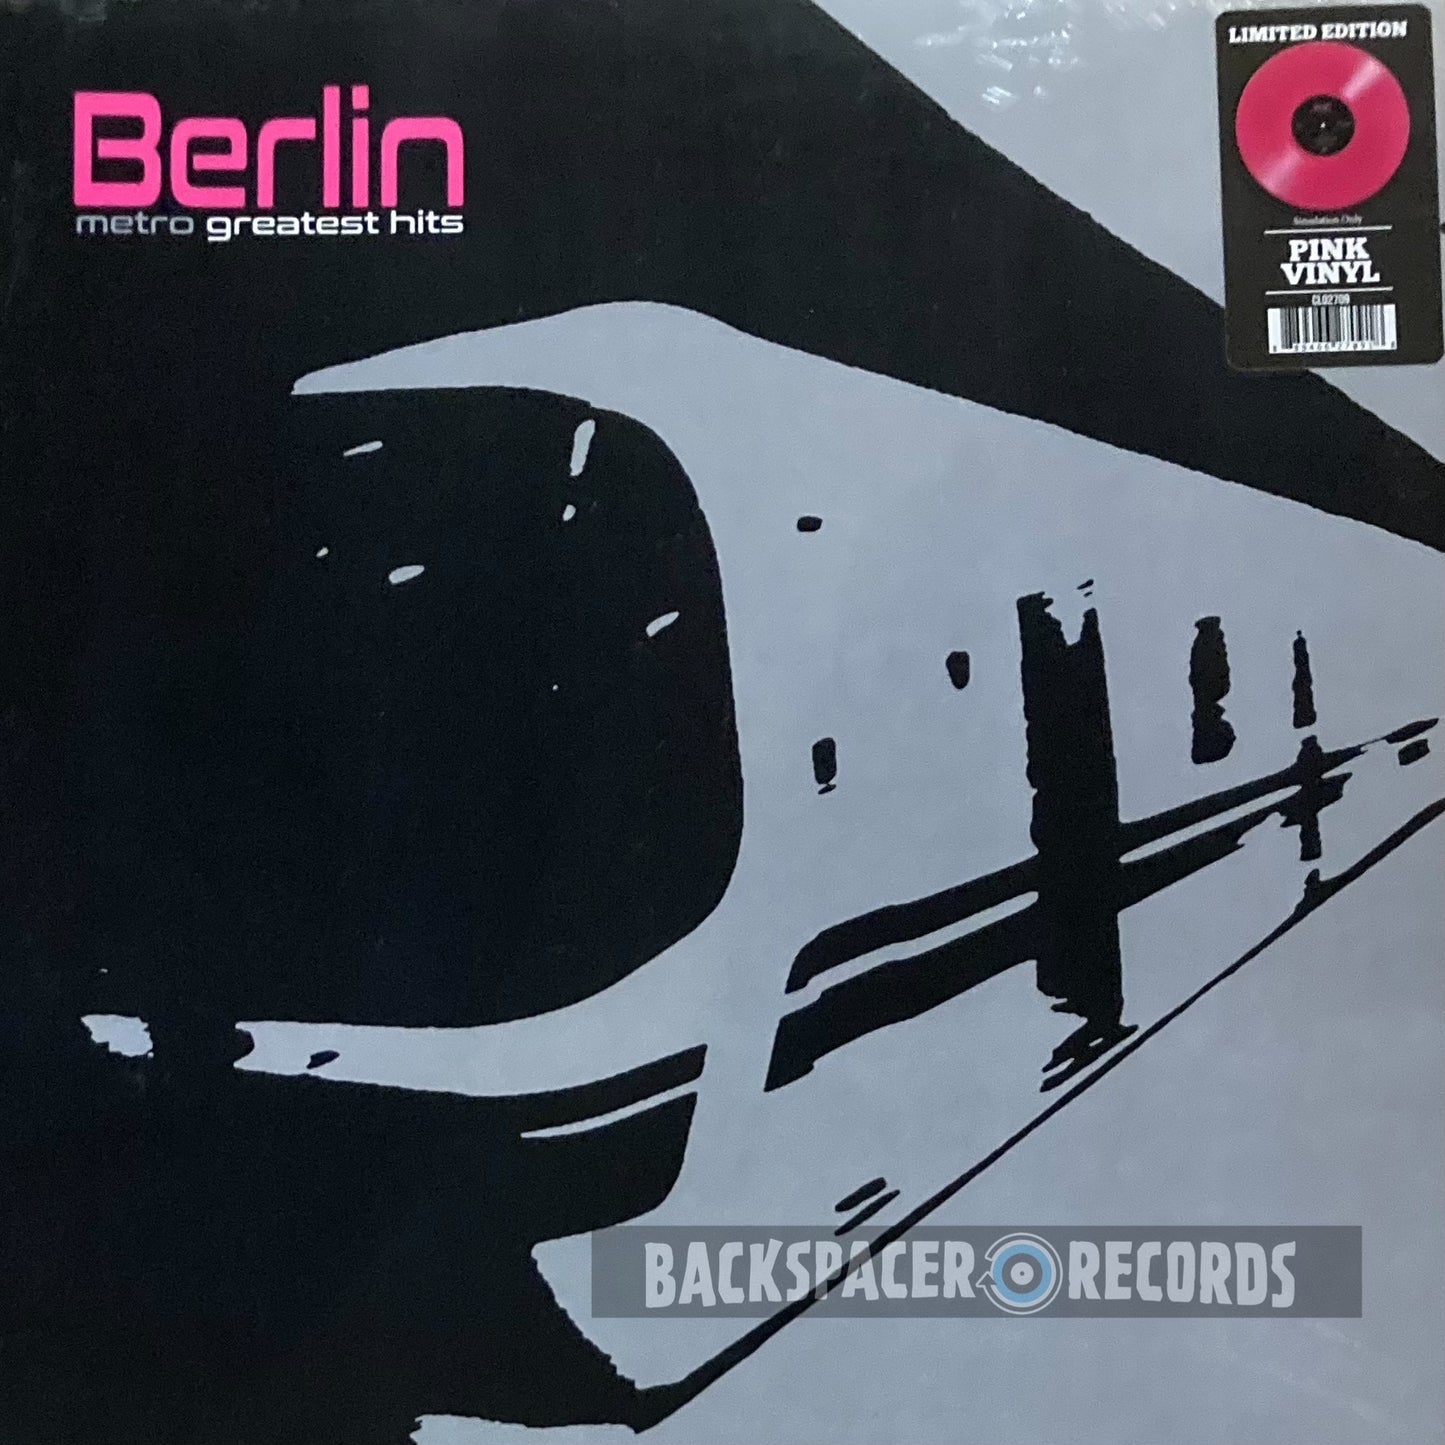 Berlin - Metro Greatest Hits (Limited Edition) LP (Sealed)